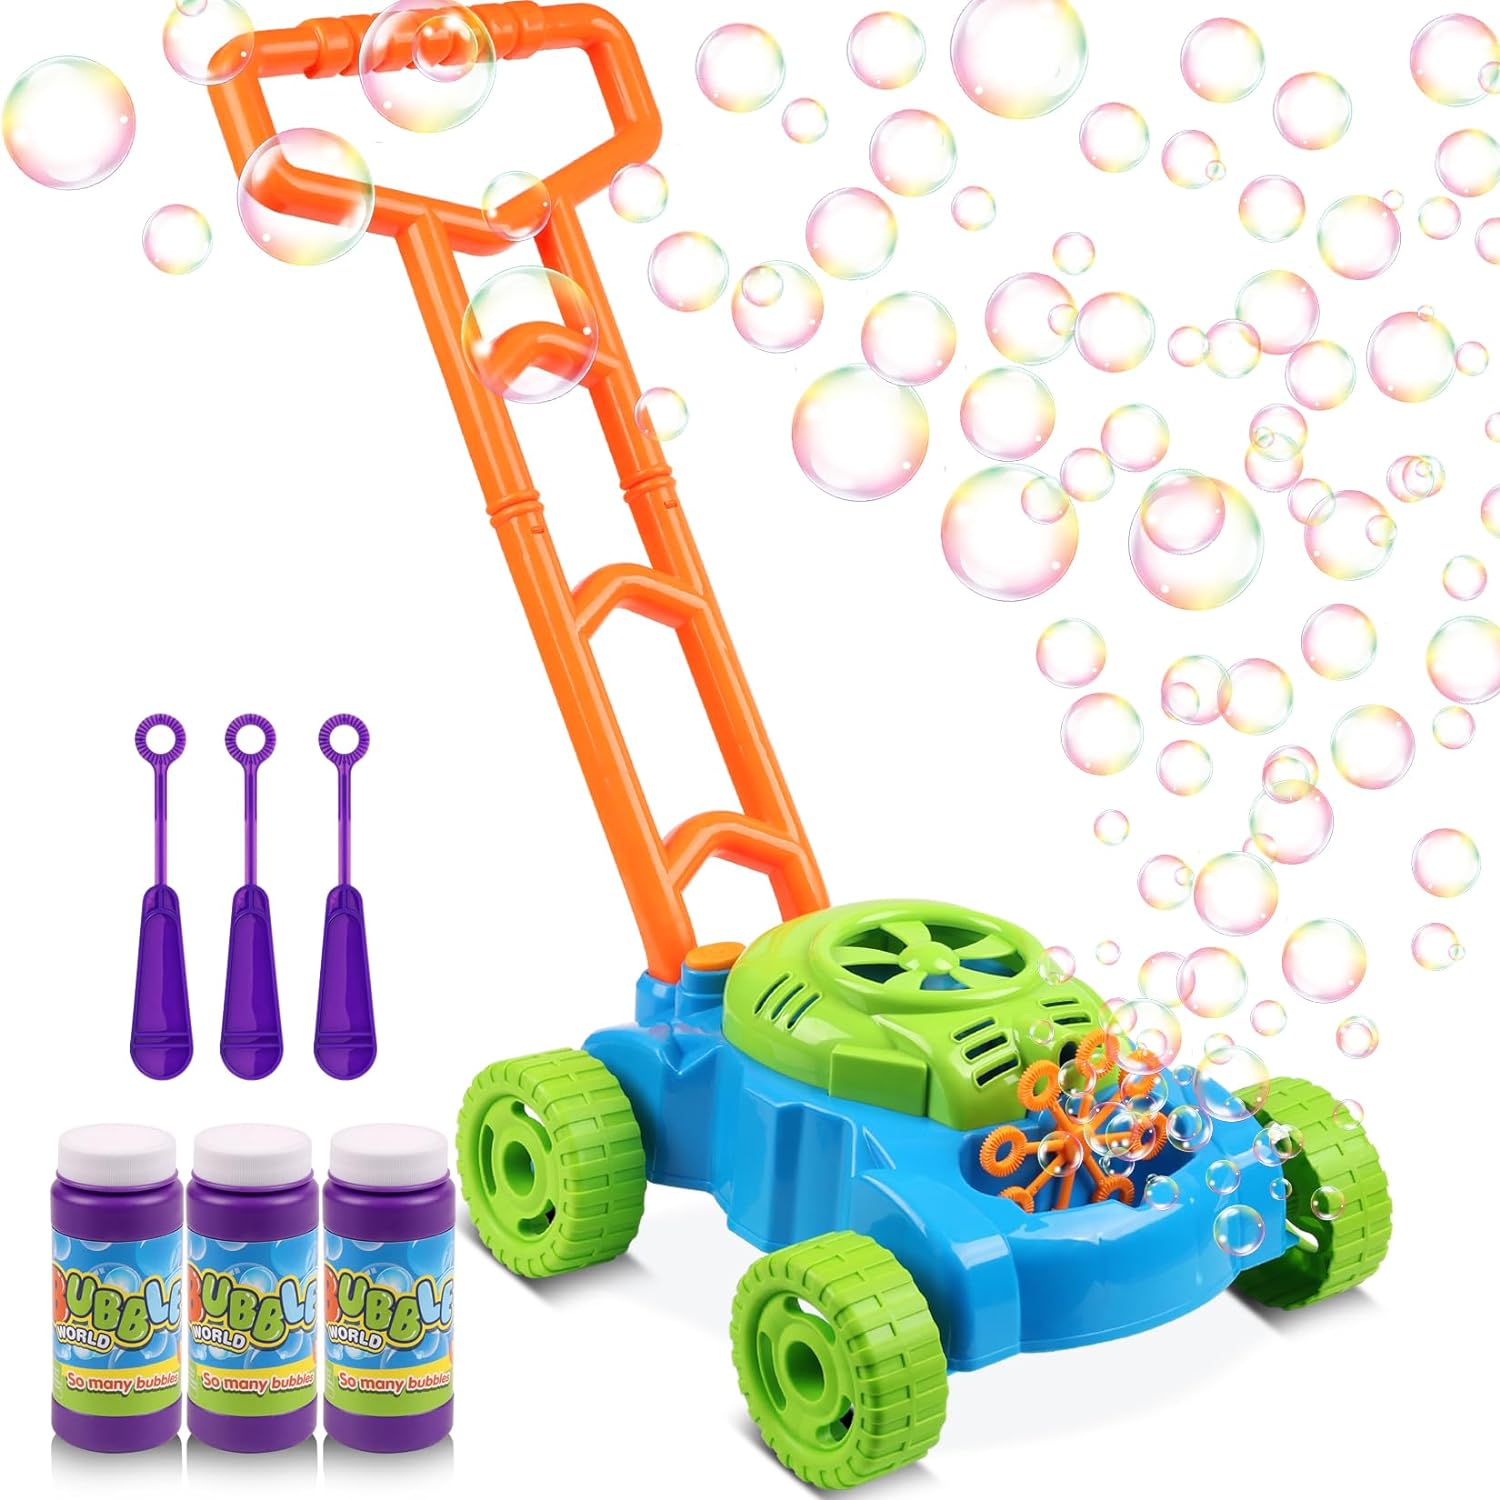 Lydaz Bubble Lawn Mower for Toddlers, Kids Bubble Blower Maker Machine, Indoor Outdoor Push Backyard Gardening Toys, Birthday Gifts Halloween Party Favors Games Toys for Preschool Baby Boys Girls